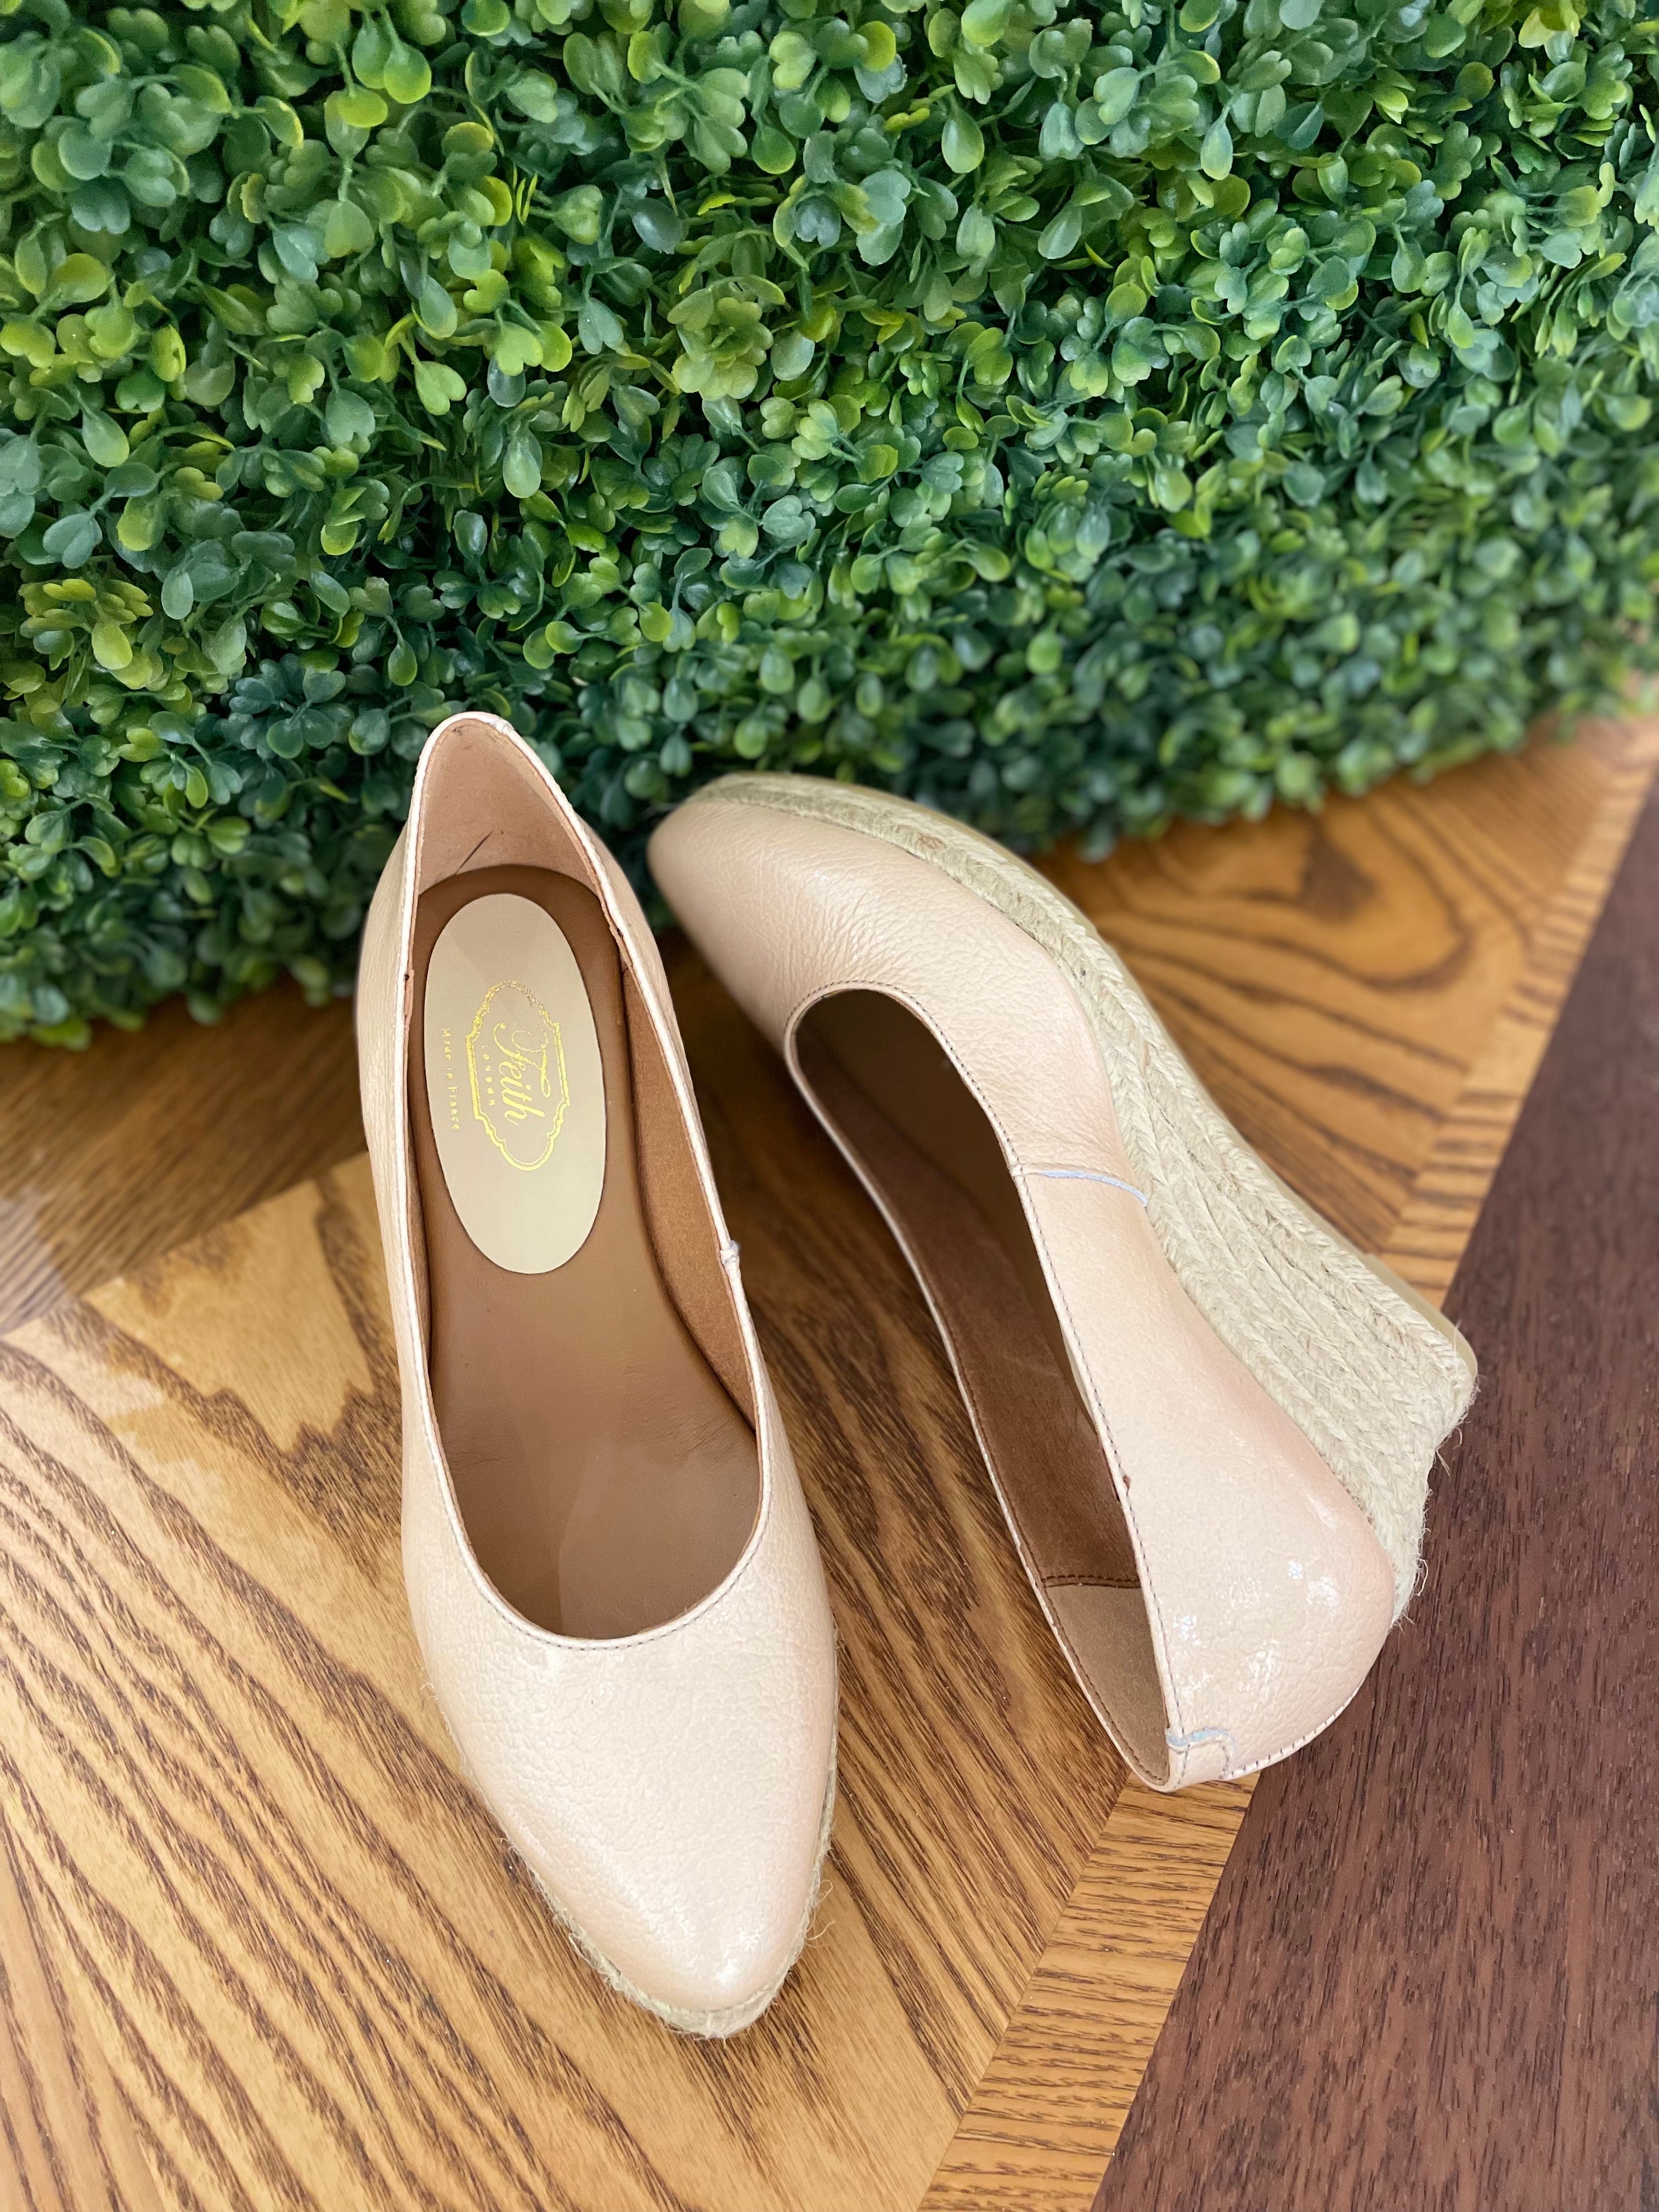 Espadrille Pumps in Nude Leather